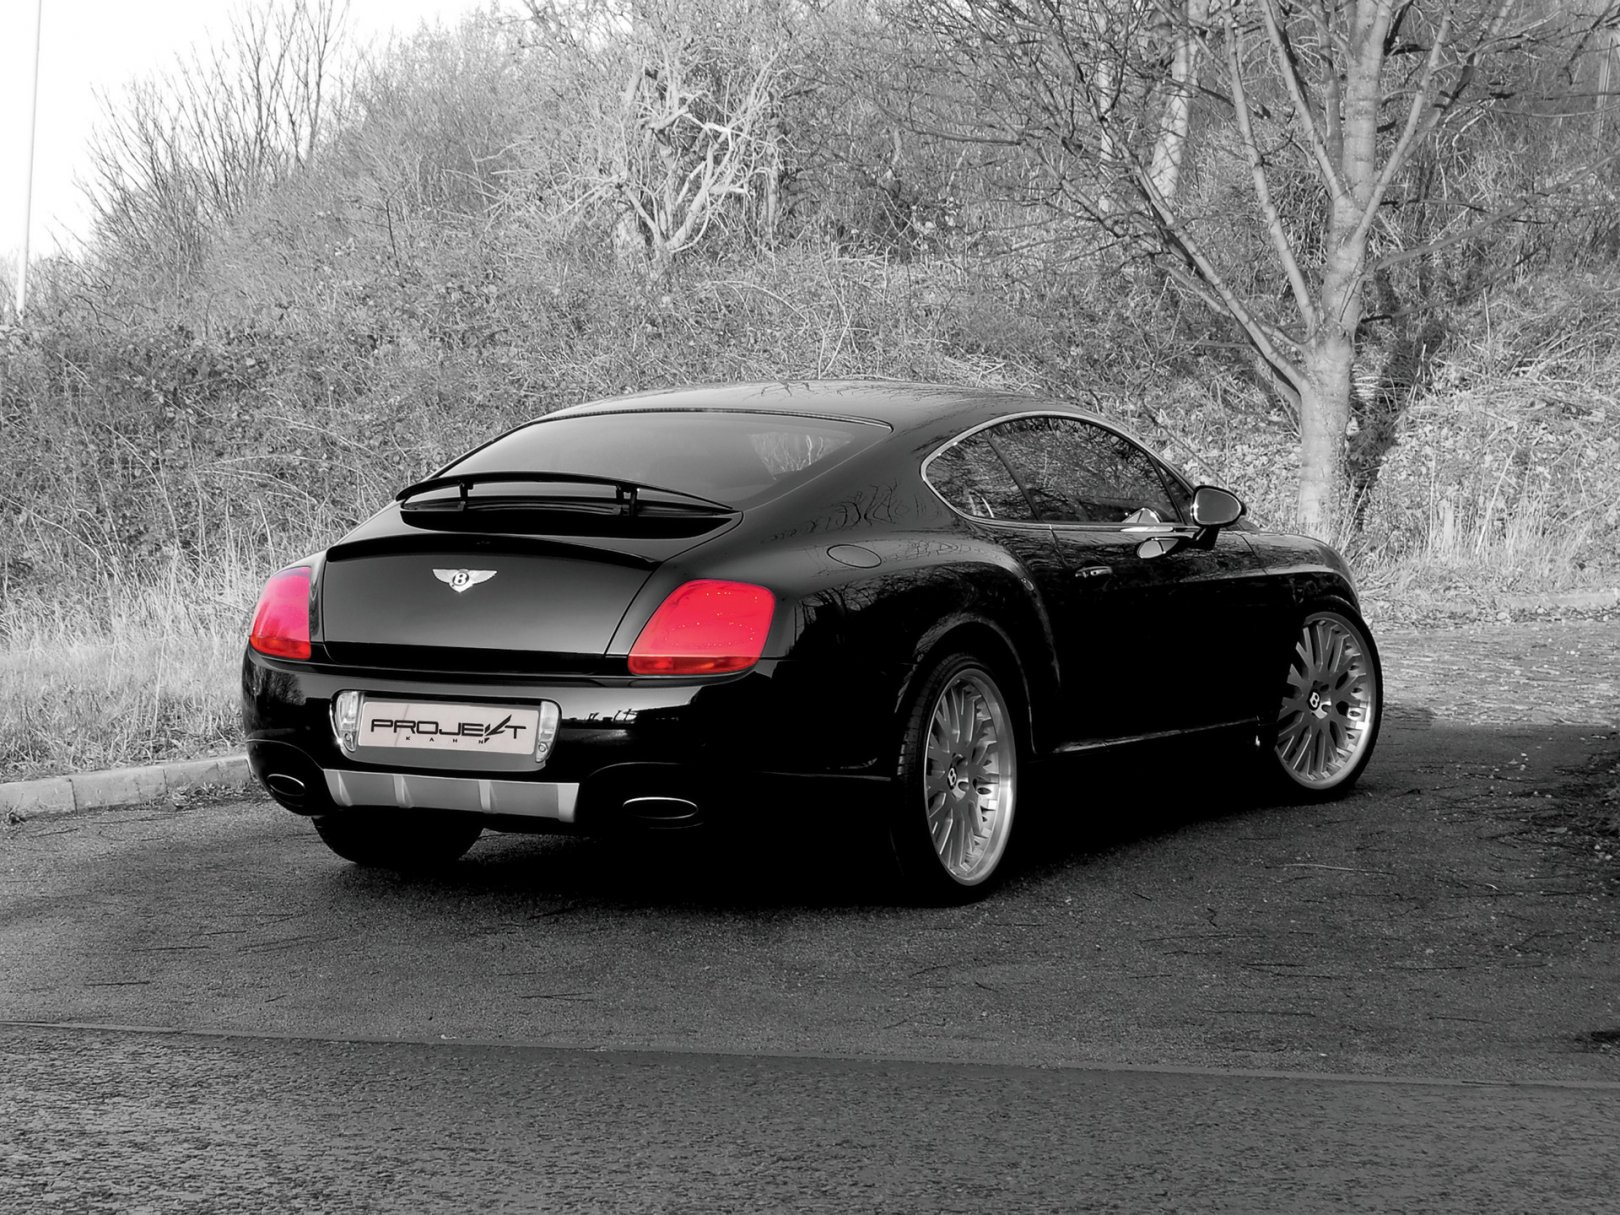 Foto: Project Kahn Bentley Continental GT Rear Angle (2007)